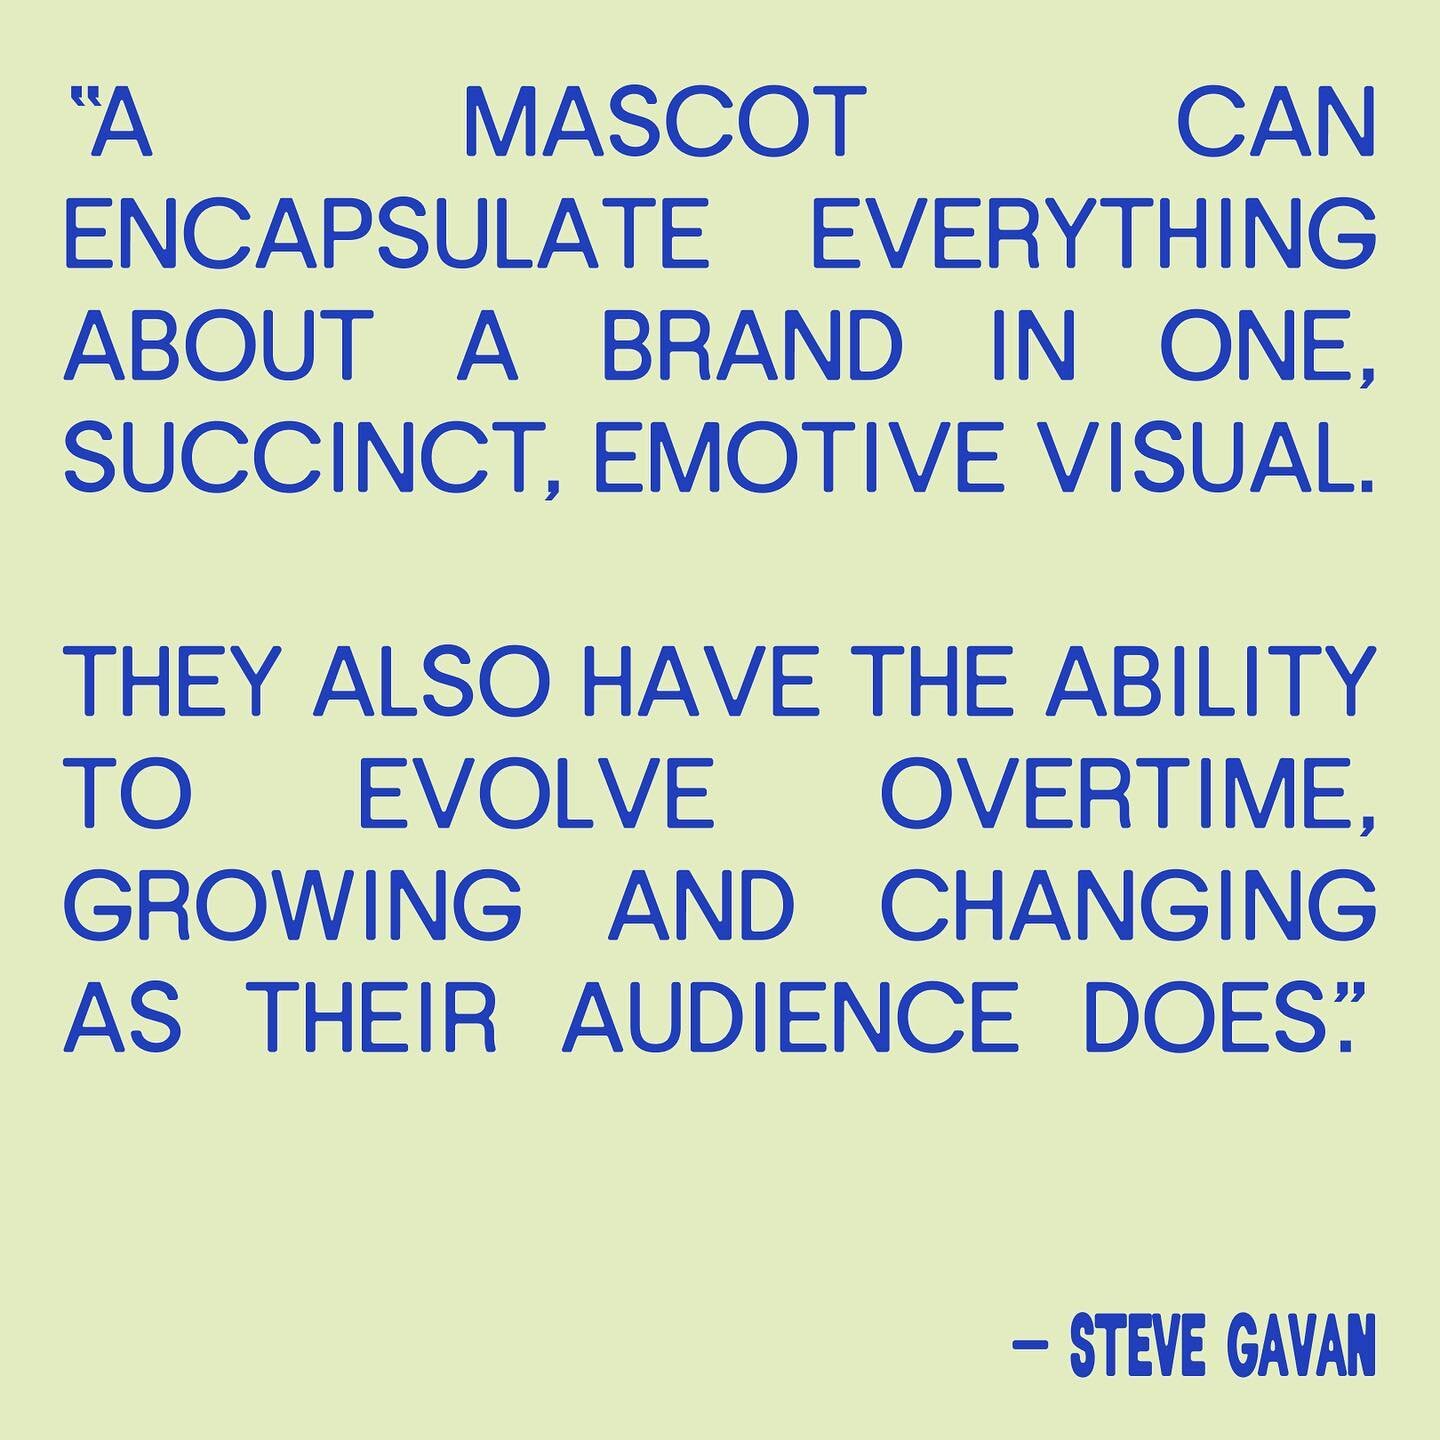 This quote sums up what I try to get across to brands so so so perfectly. 

Said by the king of illustration @steve_gavan so you better listen 👀

#illustration #illustratorsoninstagram #designillustration #mascotillustration #brandmascot